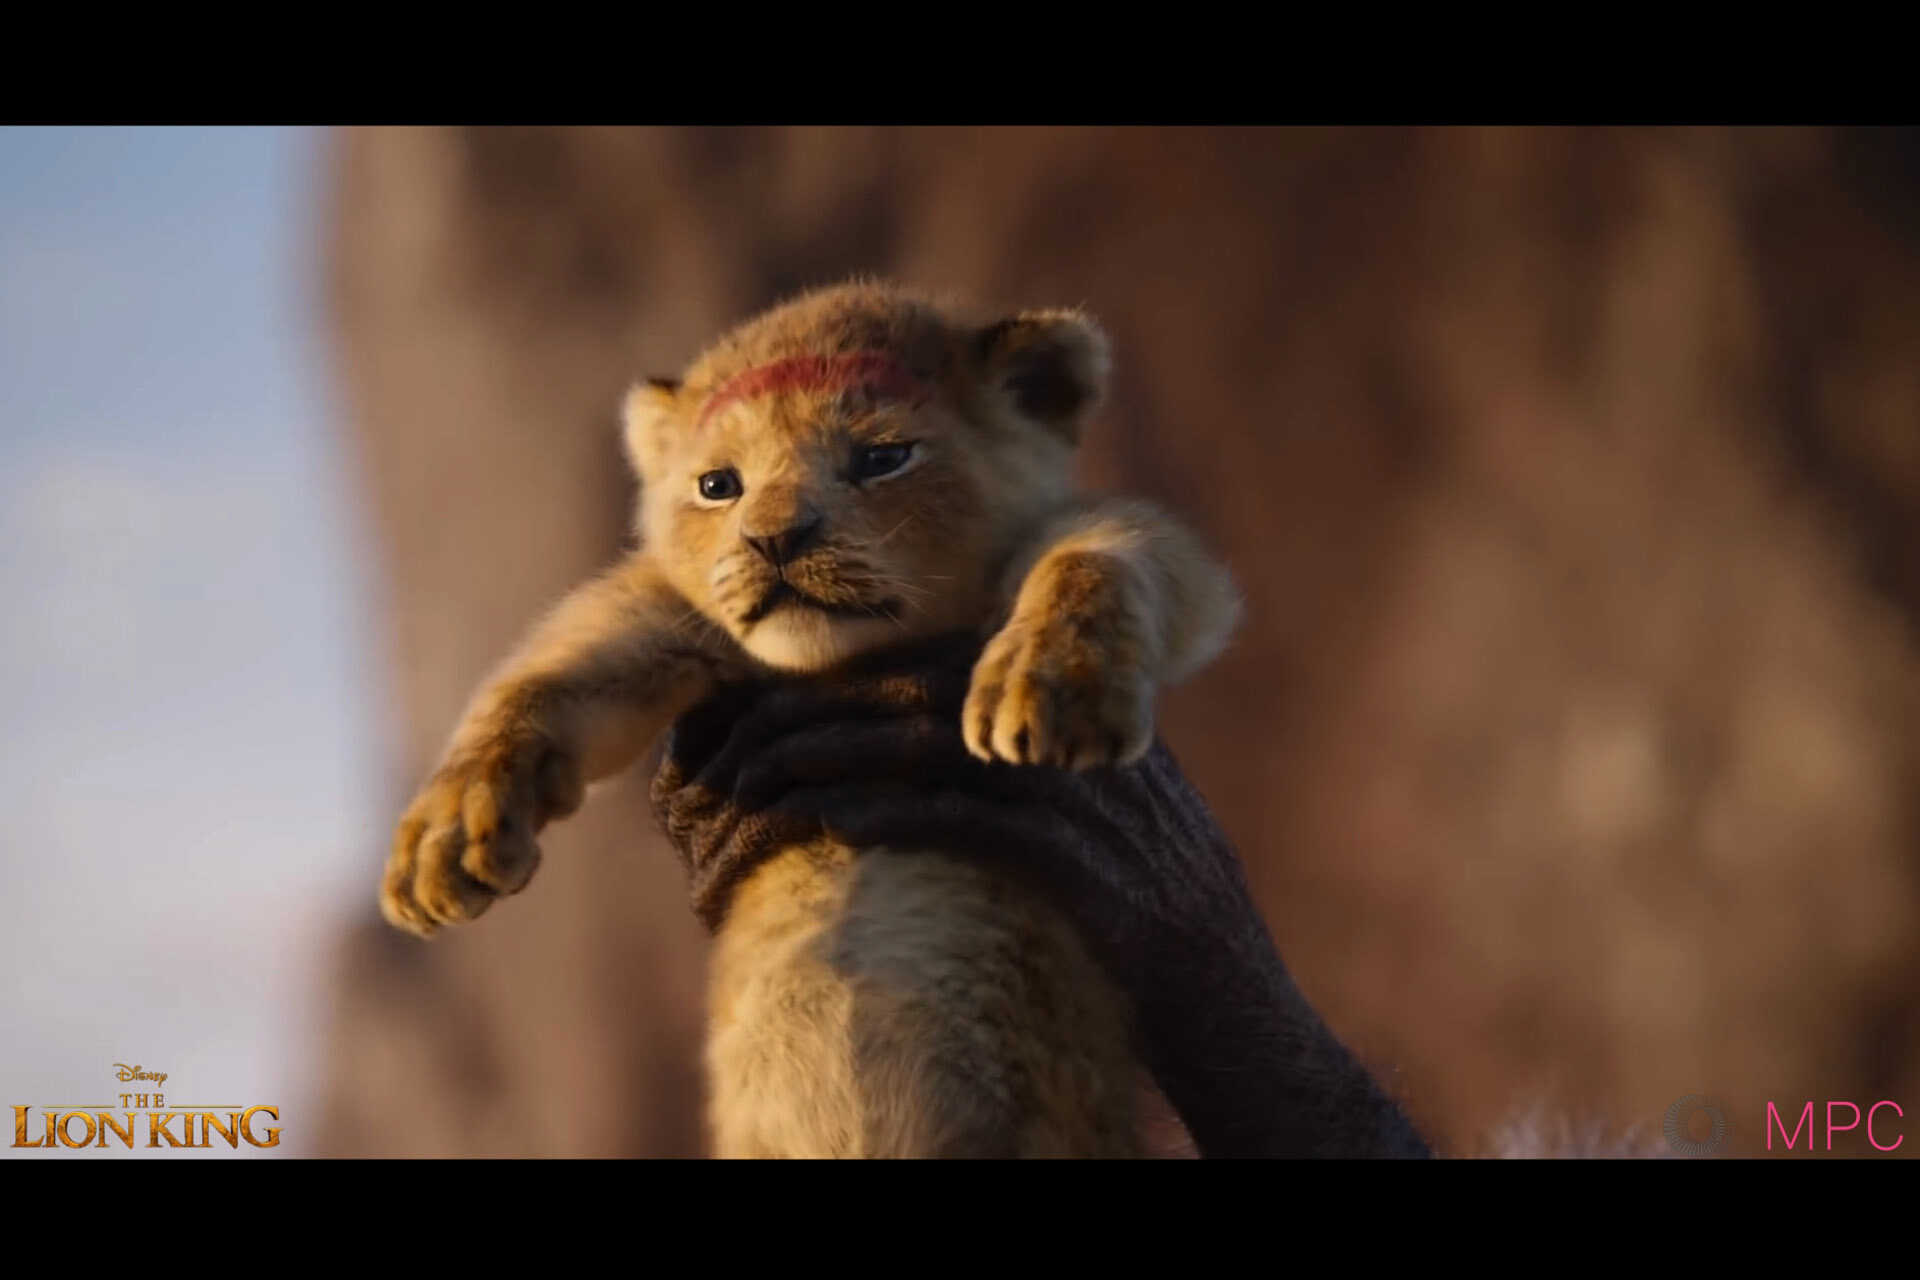 Scene from The Lion King where Simba is held aloft